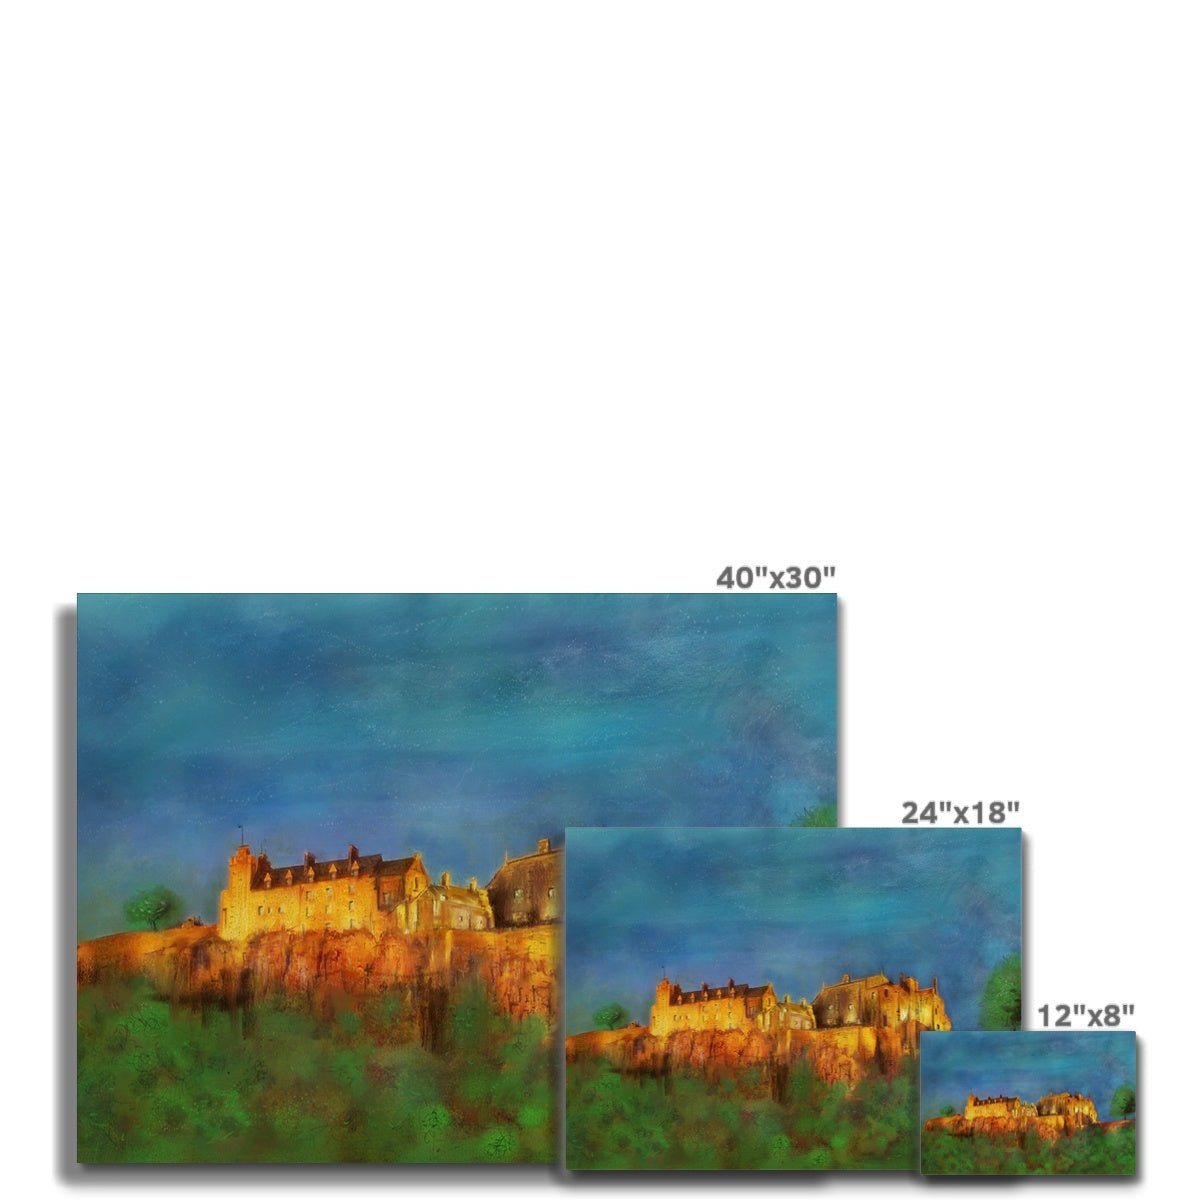 Stirling Castle Painting | Canvas From Scotland-Contemporary Stretched Canvas Prints-Historic & Iconic Scotland Art Gallery-Paintings, Prints, Homeware, Art Gifts From Scotland By Scottish Artist Kevin Hunter